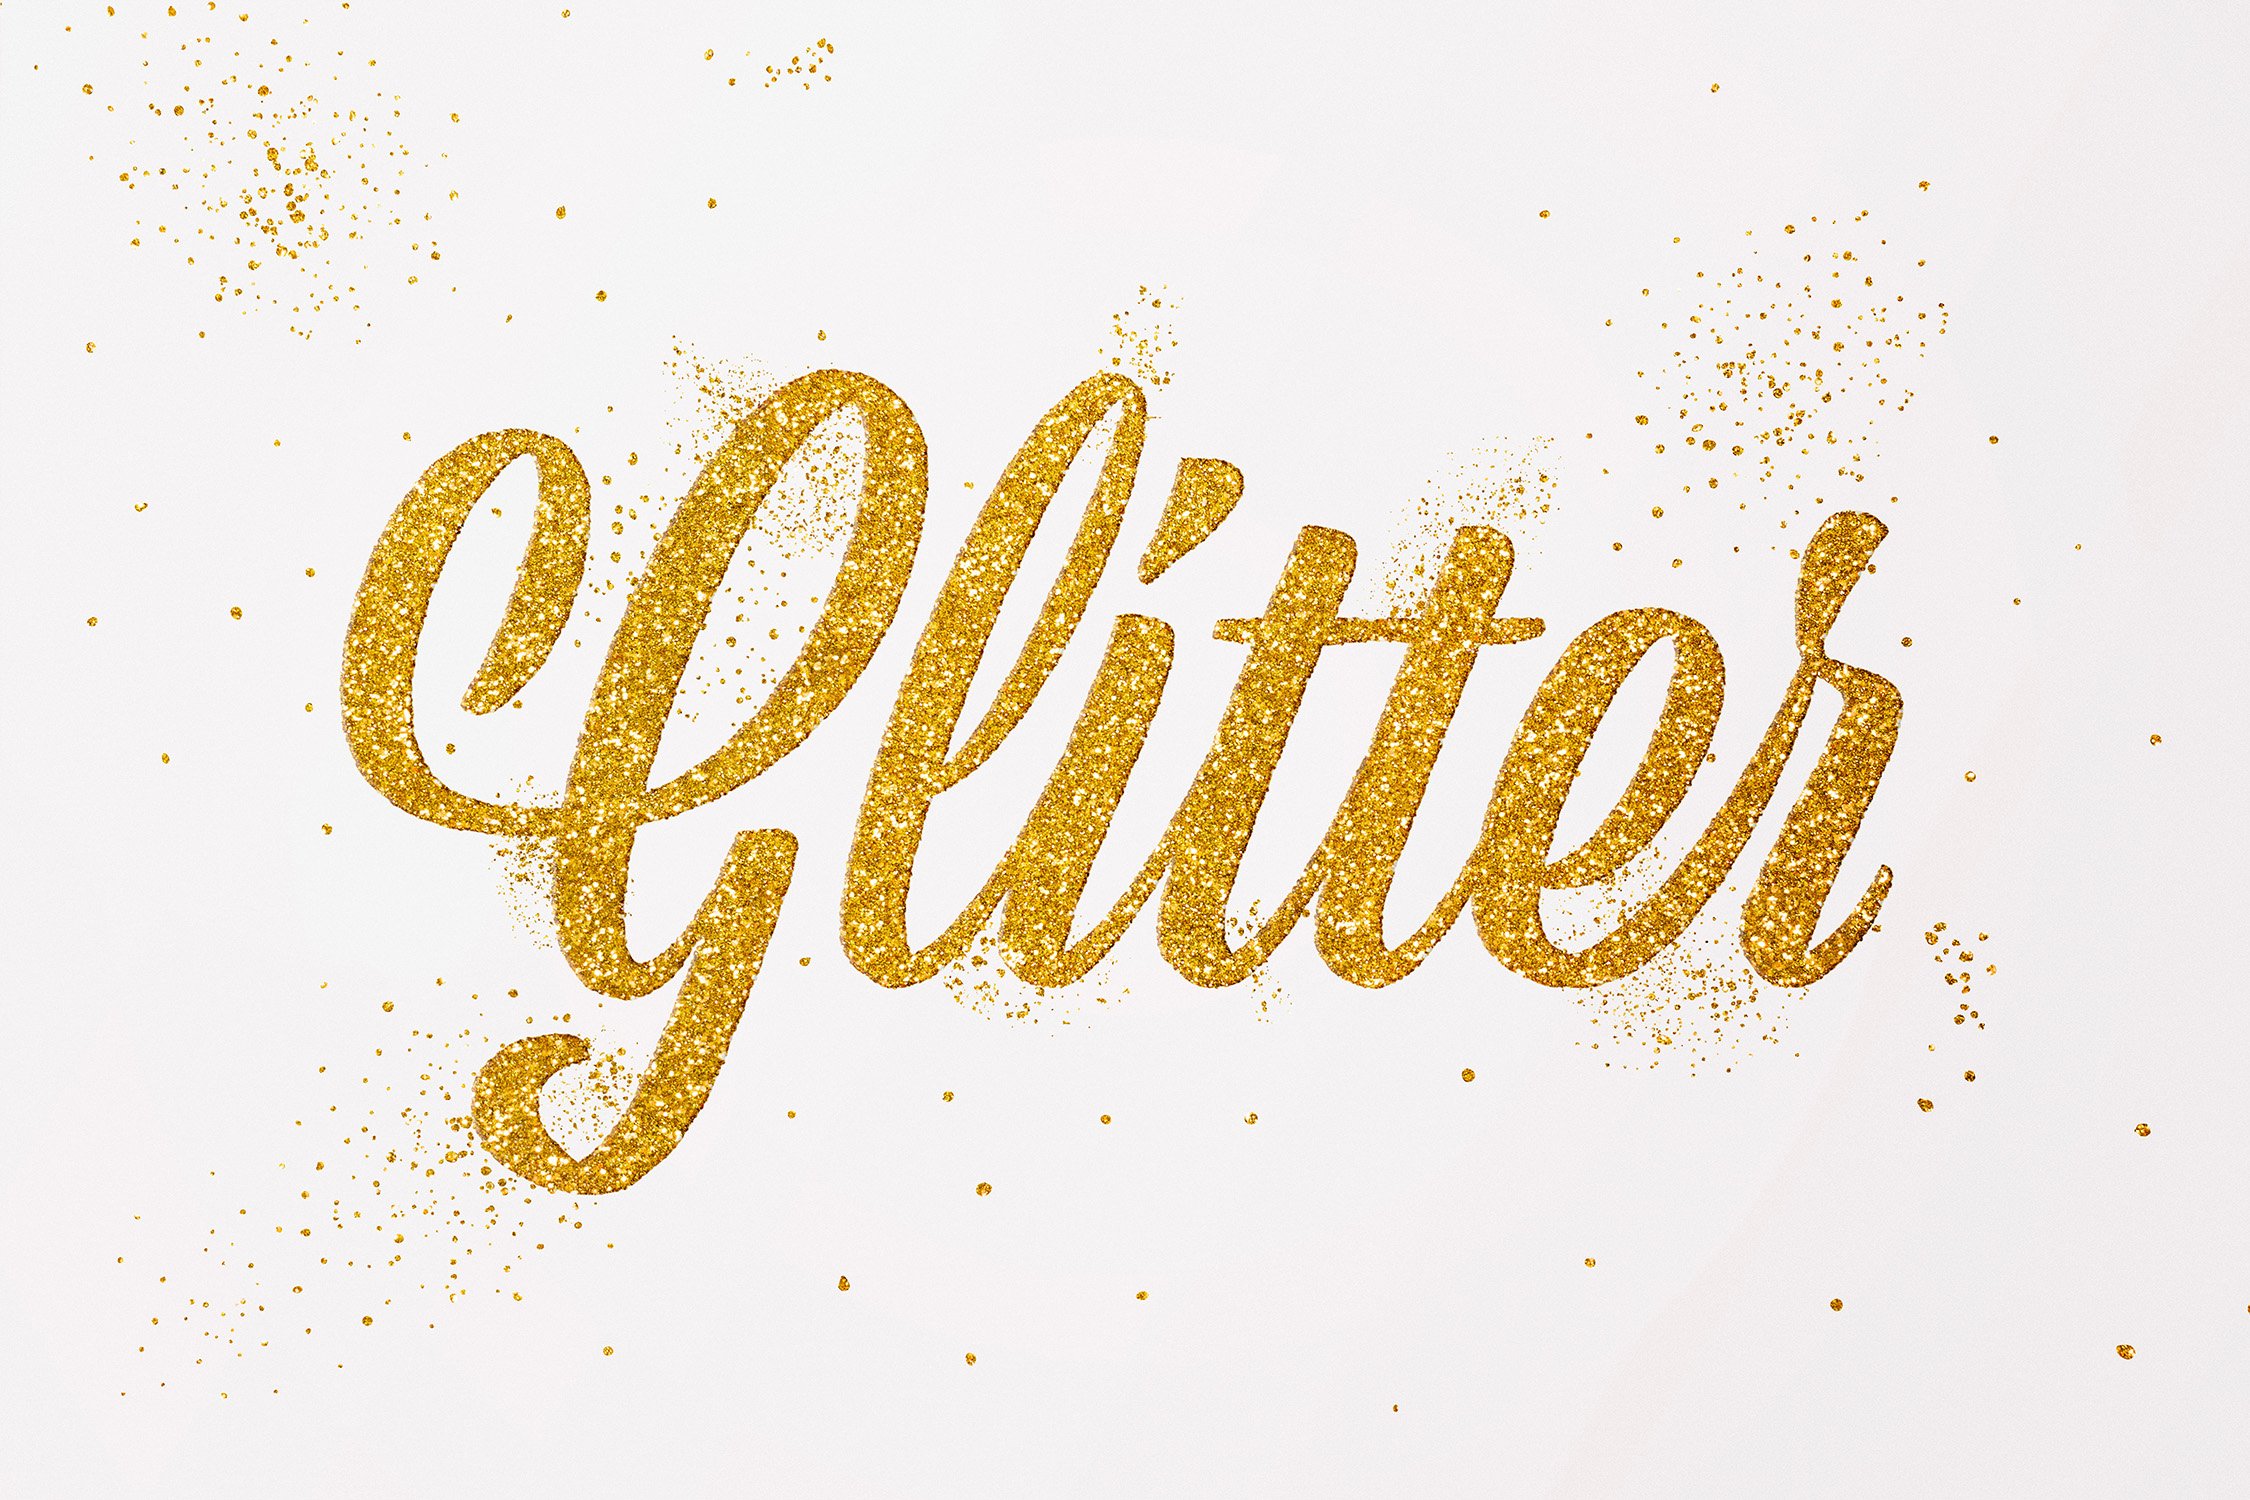 Gold Sparkles Text Effectcover image.